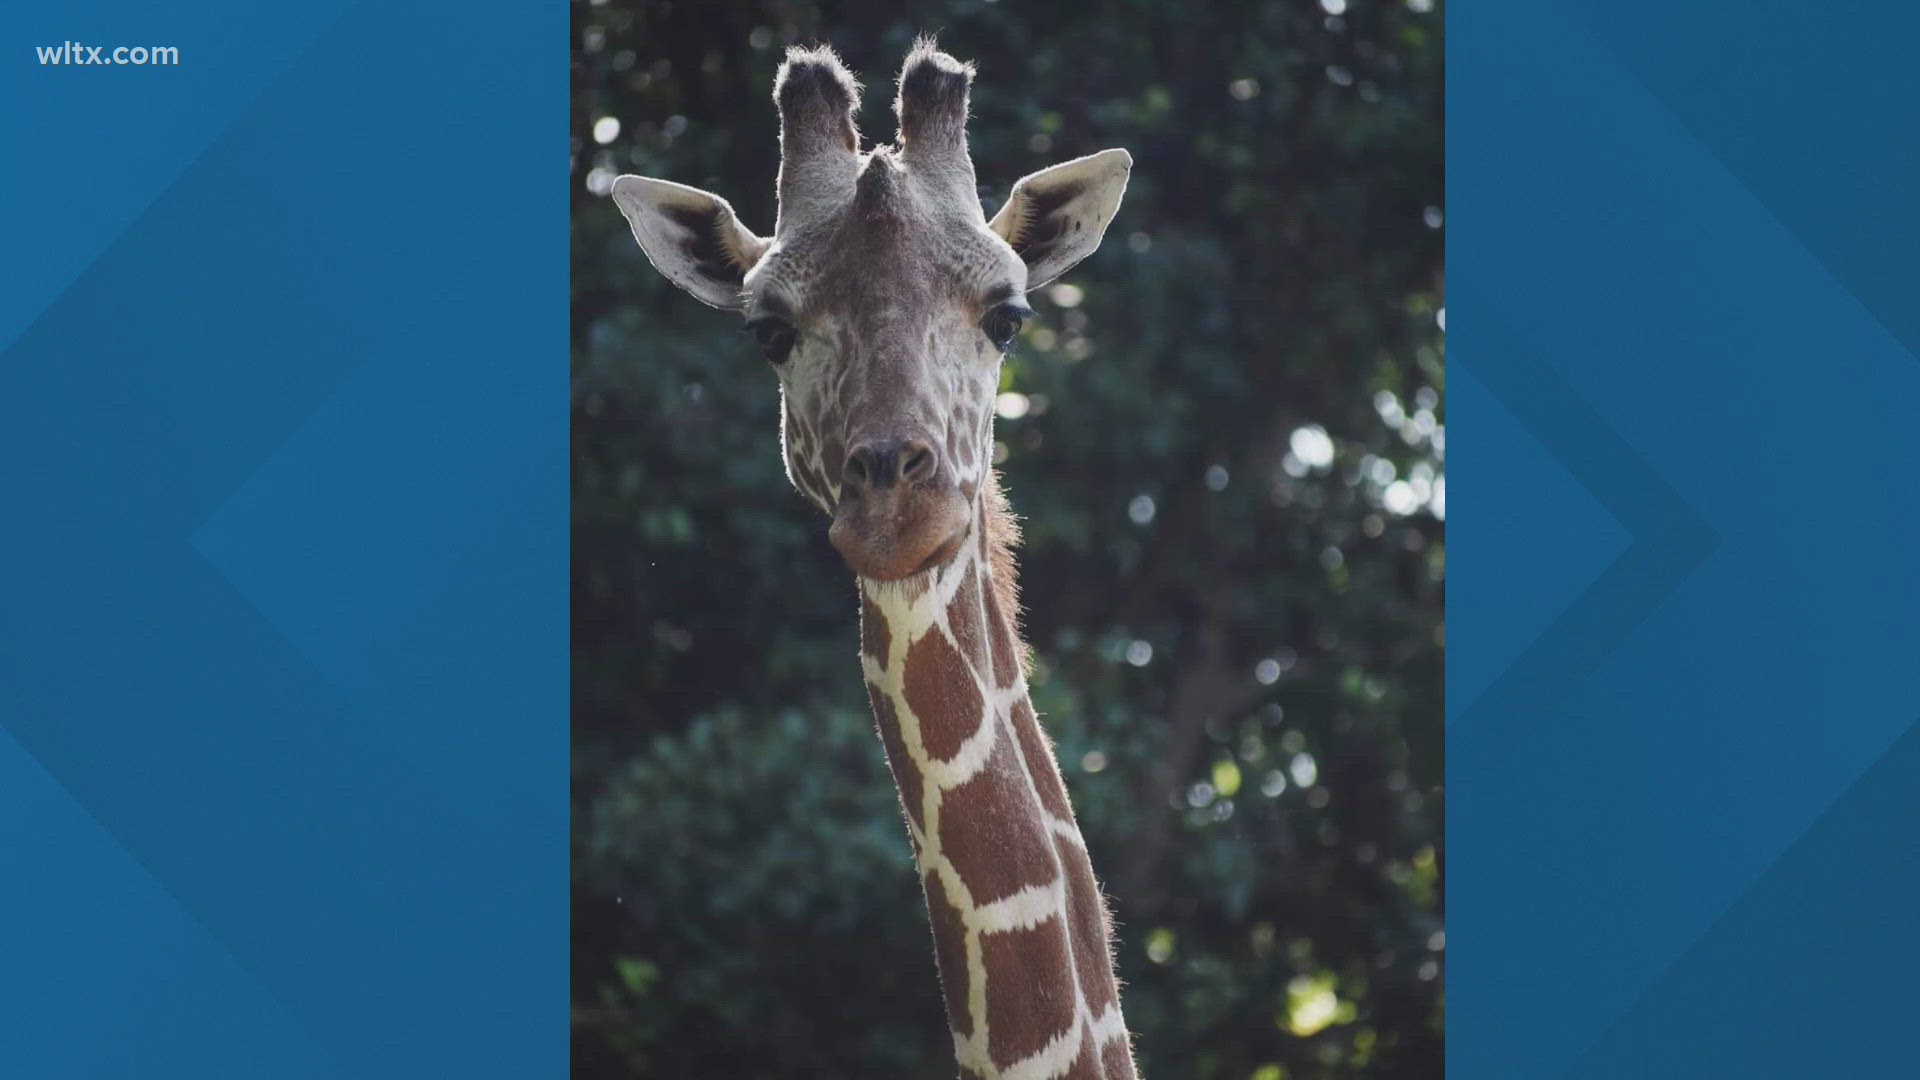 Charlie, the senior giraffe at Riverbanks Zoo has died.  He fathered 7 calves at the zoo.